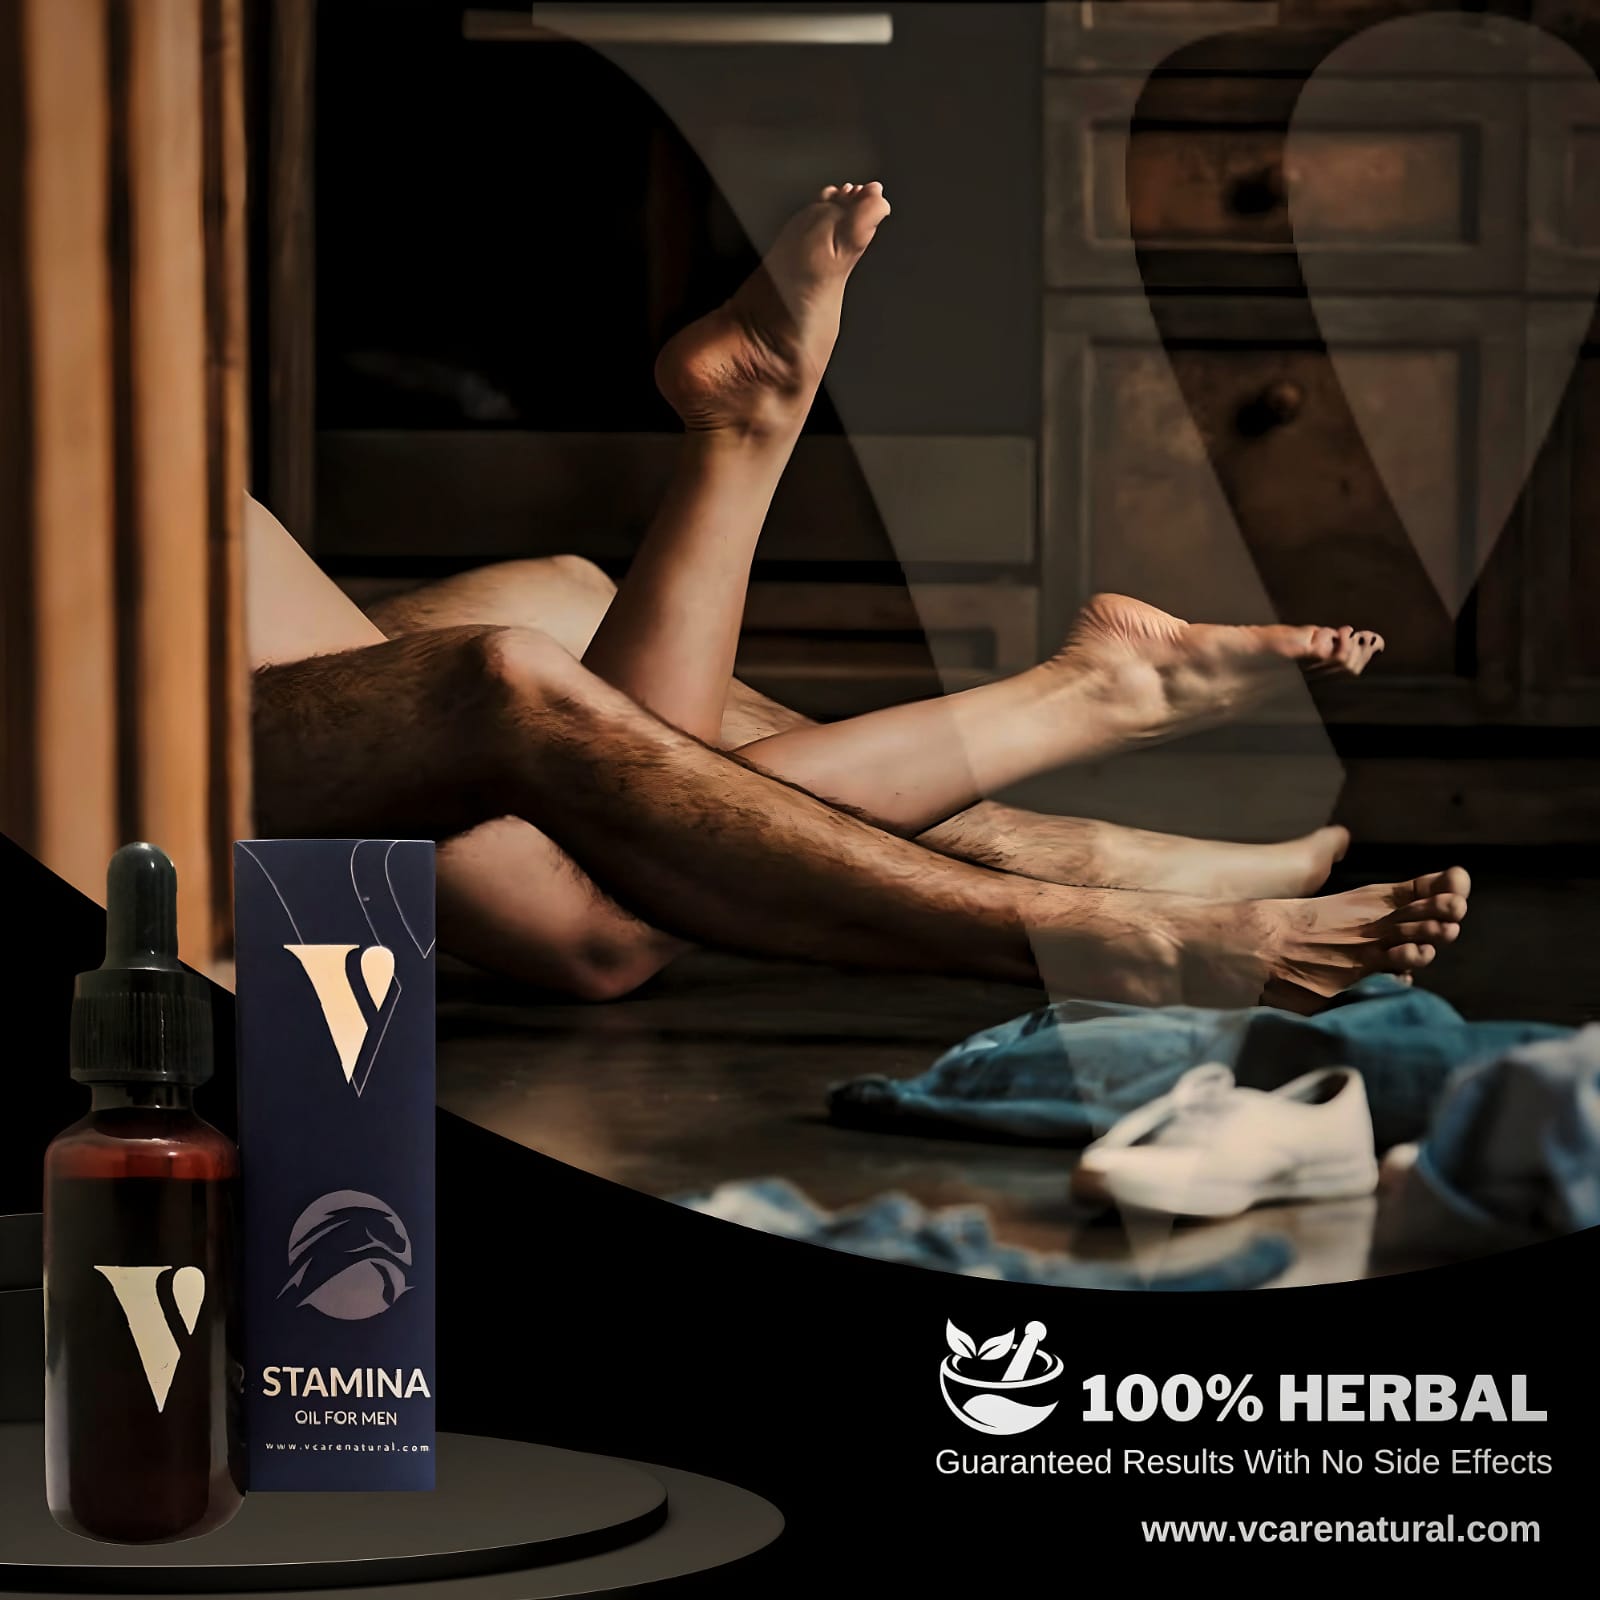 Boost Your Performance 100% Herbal - Click For More Info